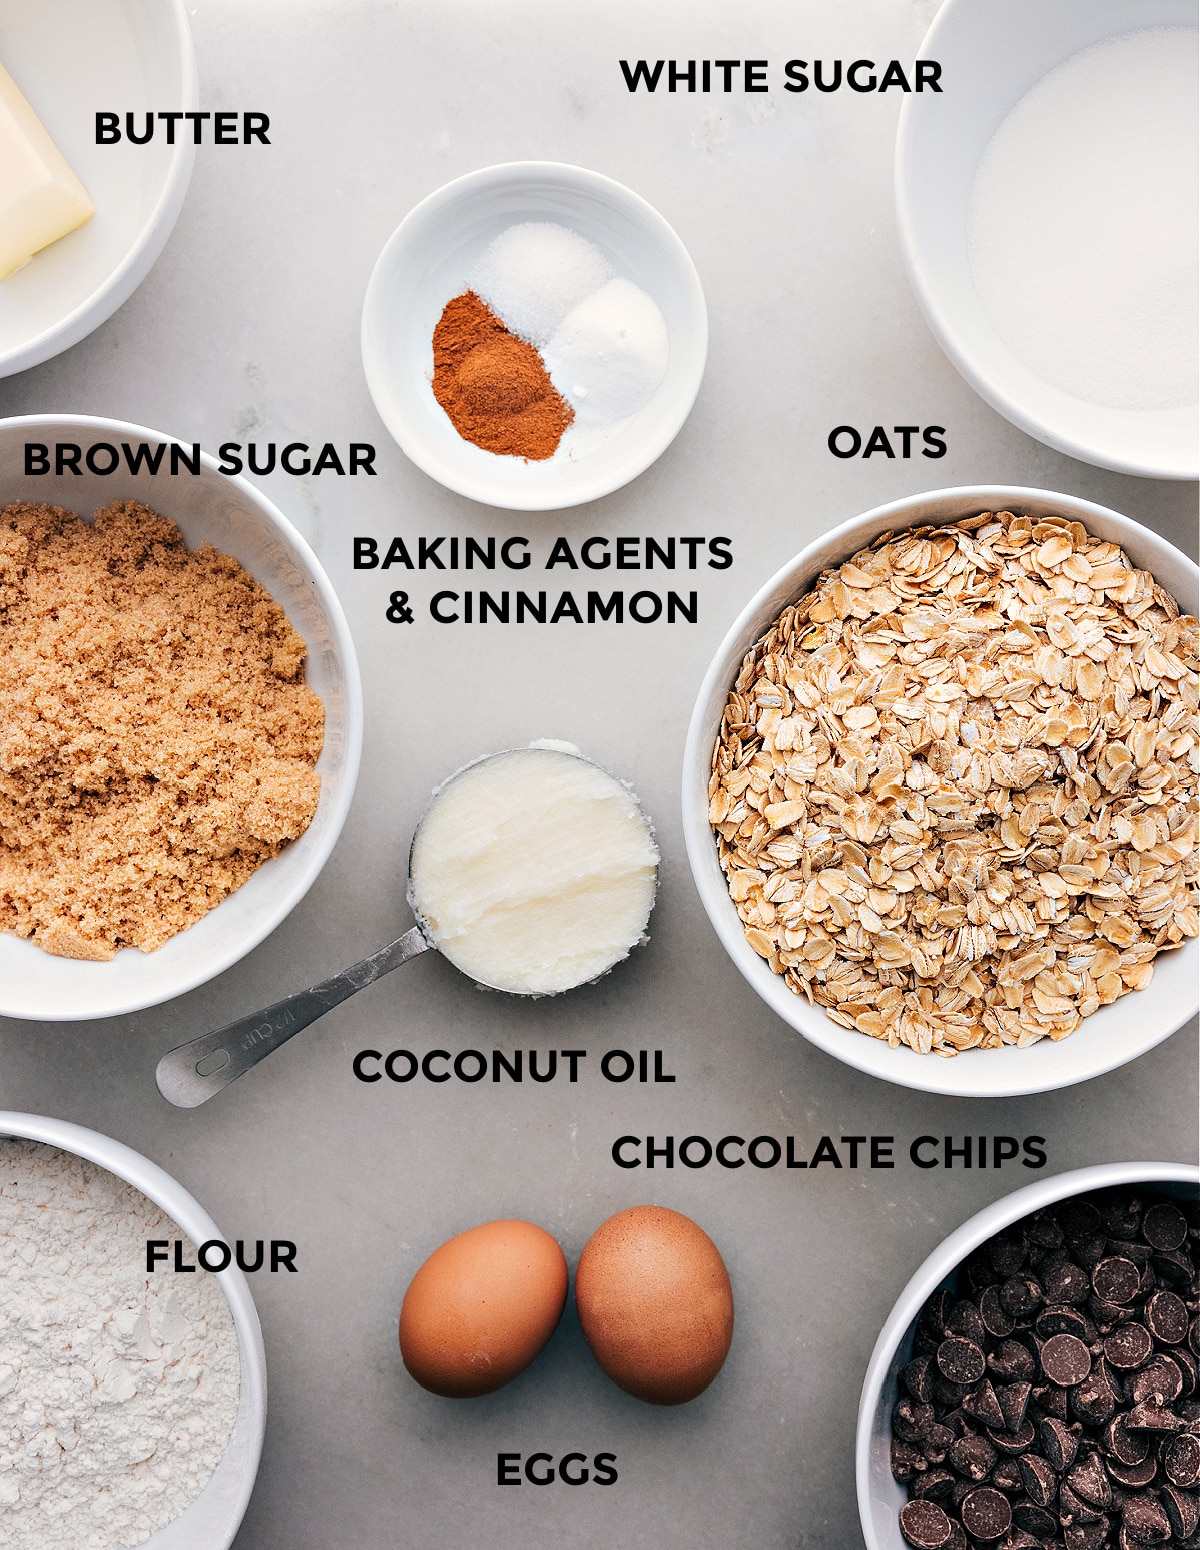 Ingredients for this recipe spread out such as oatmeal, sugar, eggs, spices, and chocolate chips.